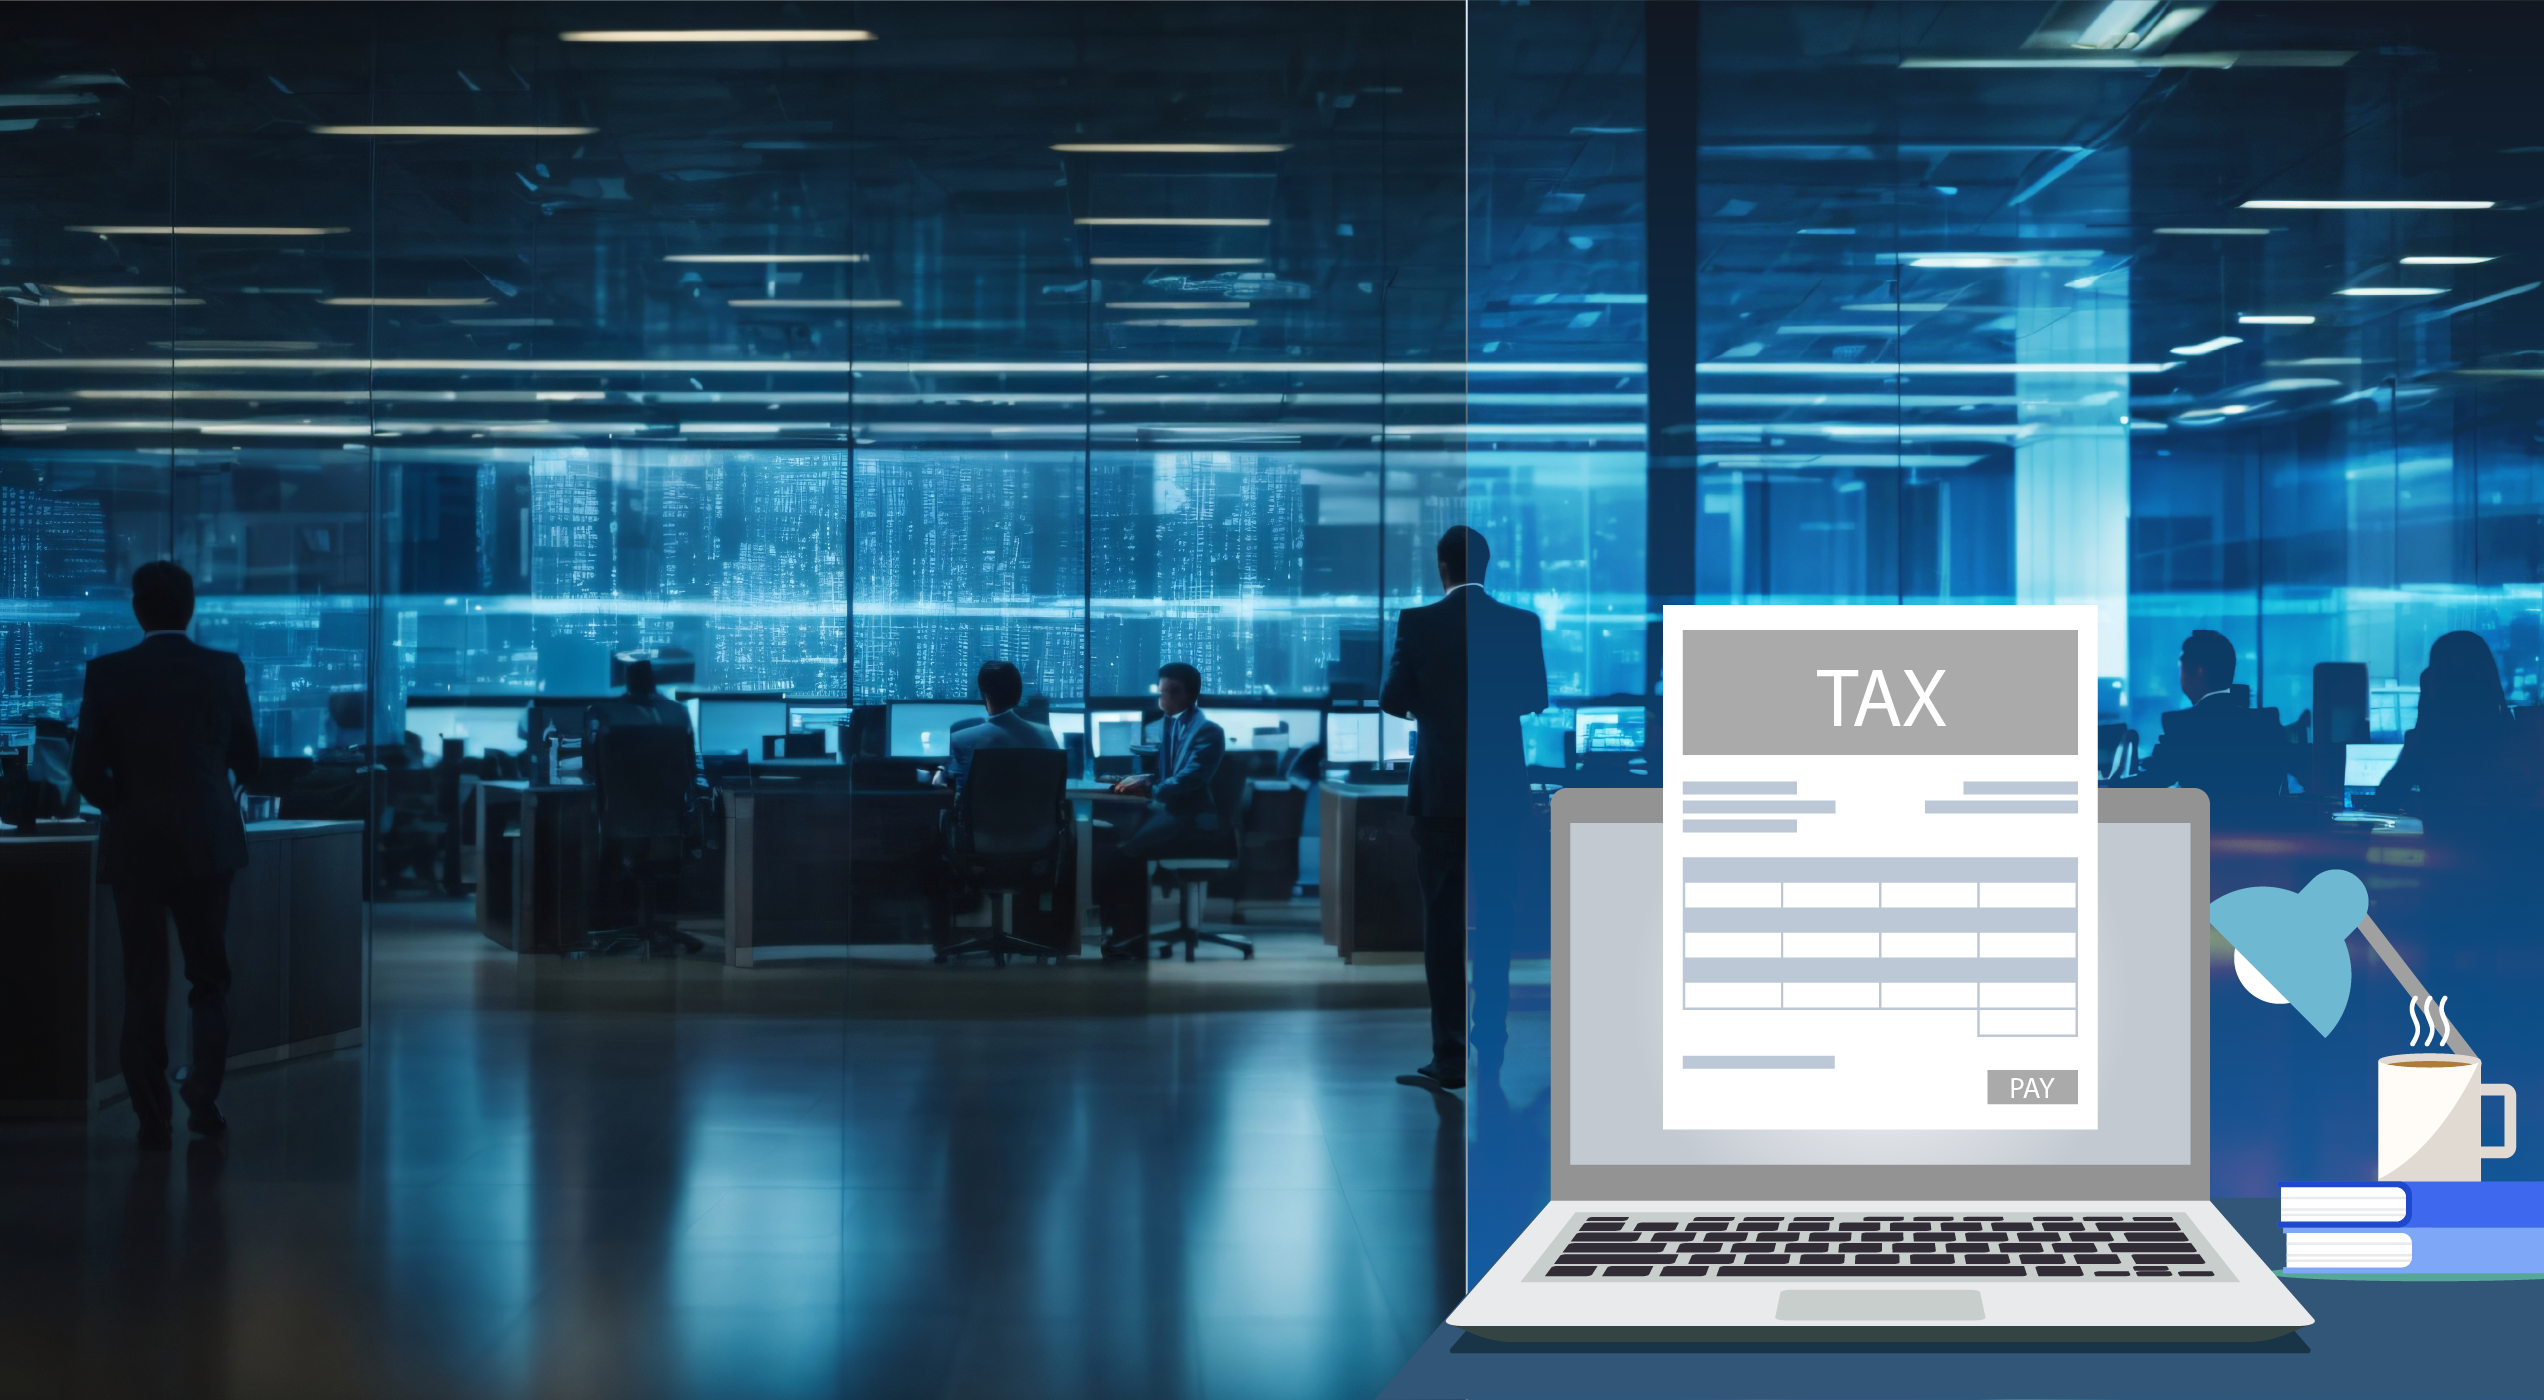 Annual Income Tax Return Obligation for Teknopark Employees